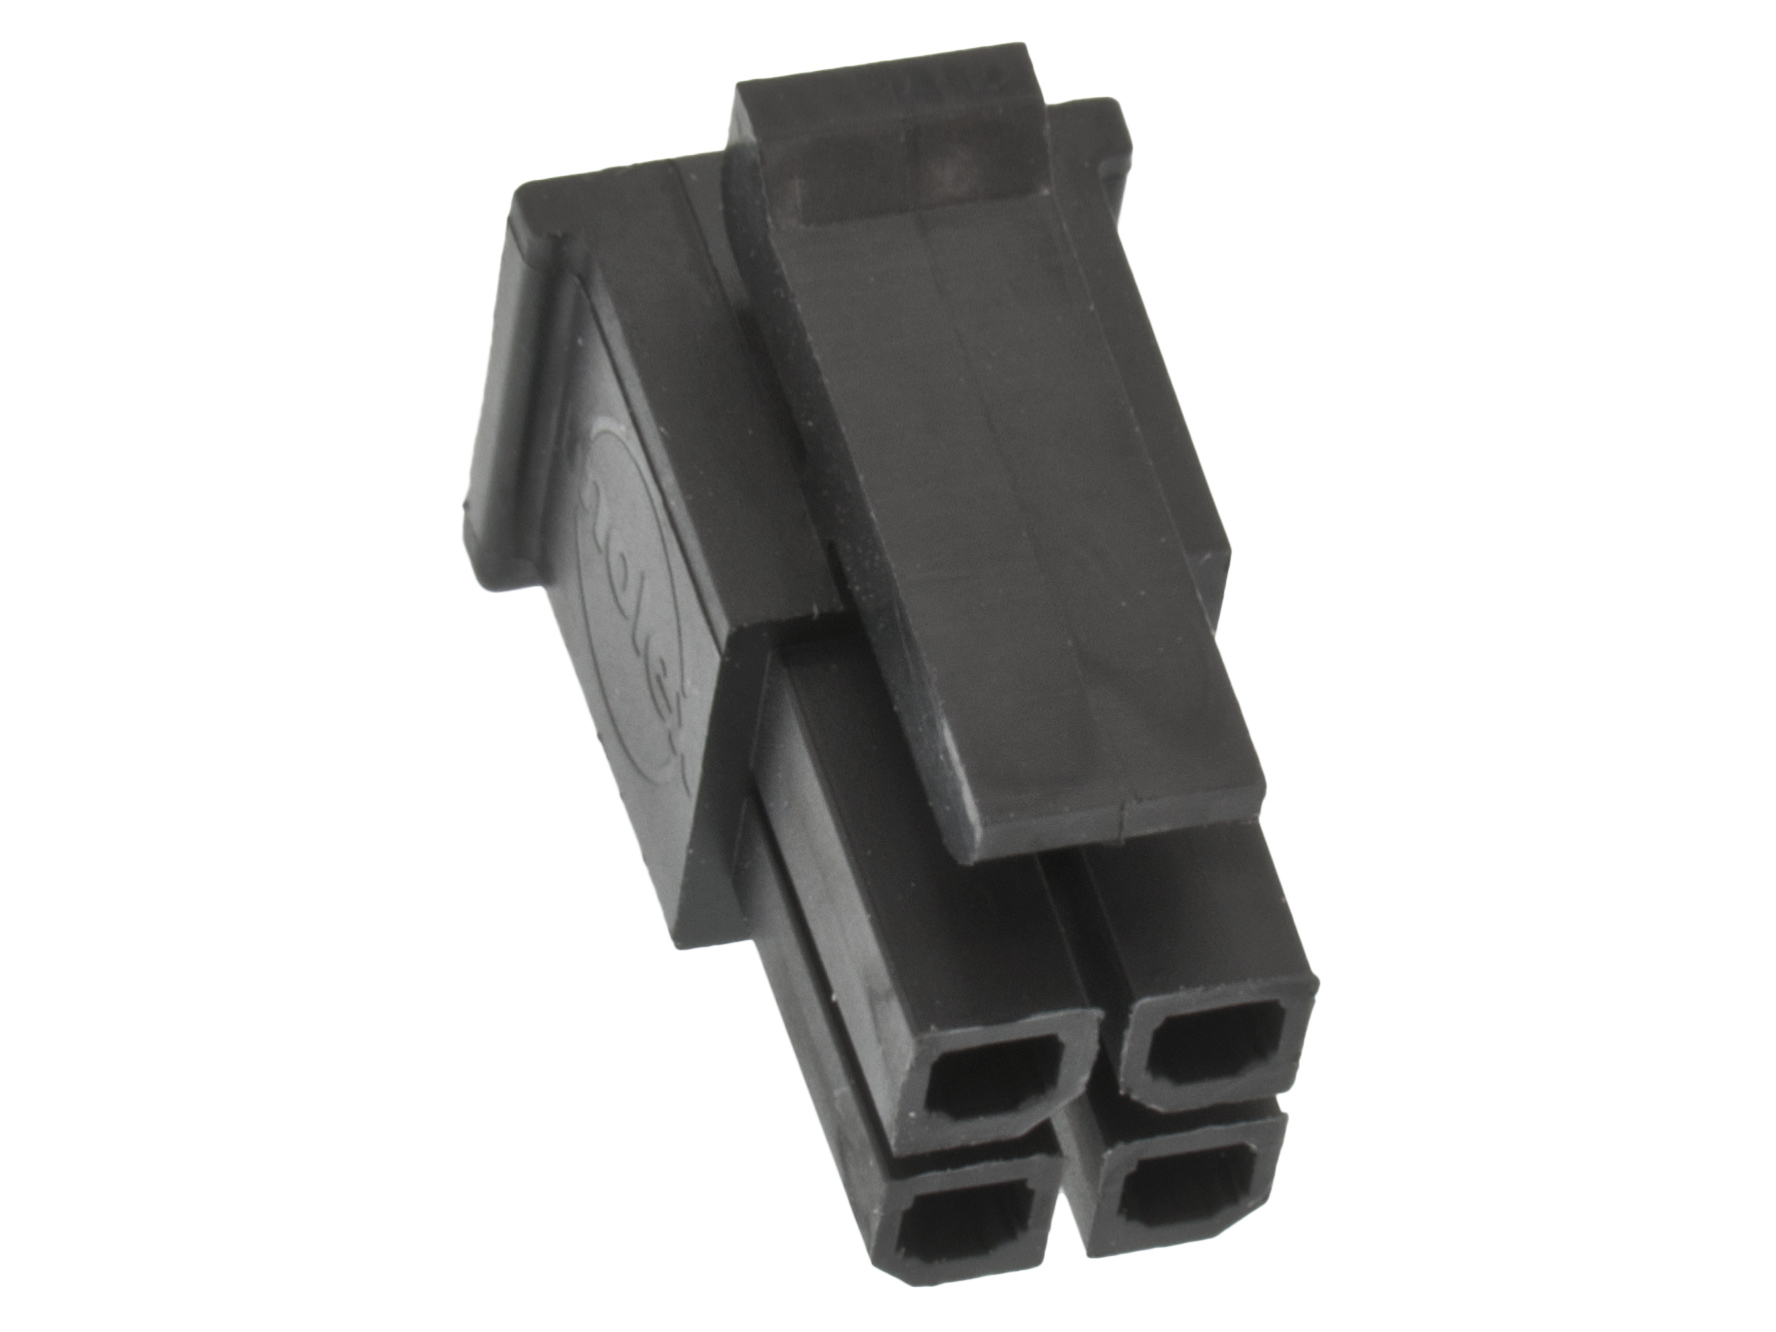 Contact housing Micro-Fit Female 2x2p 3mm @ electrokit